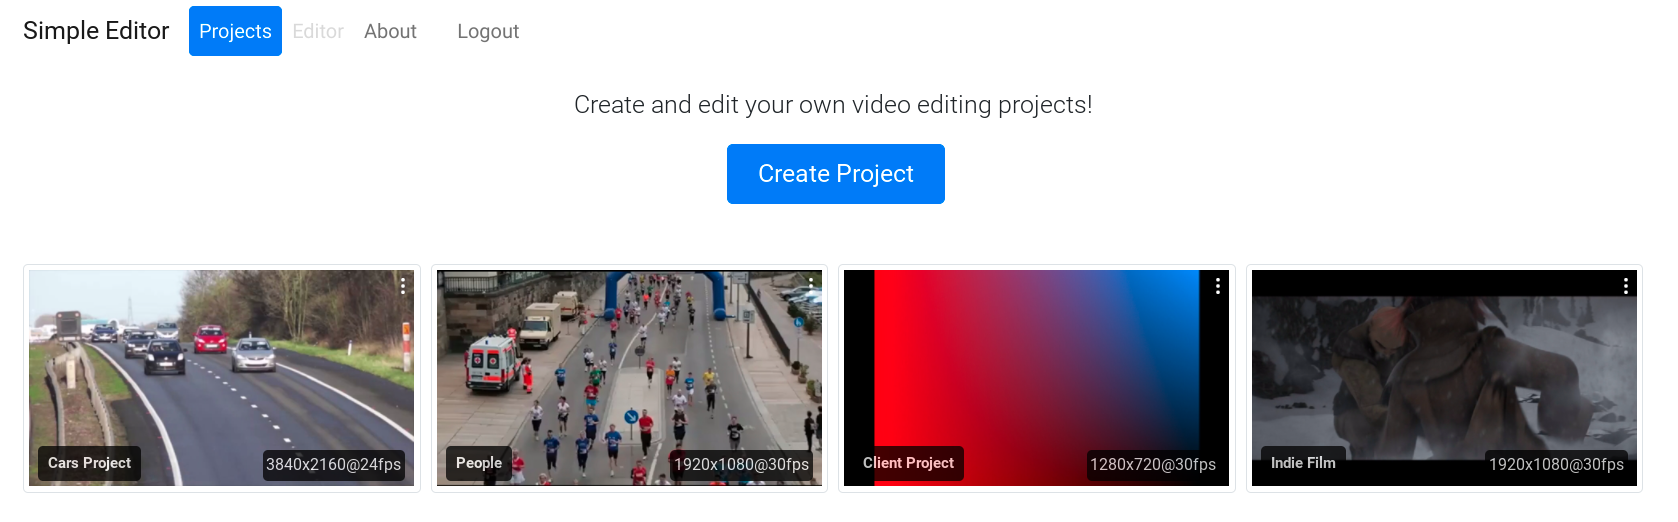 Create and manage video editing projects